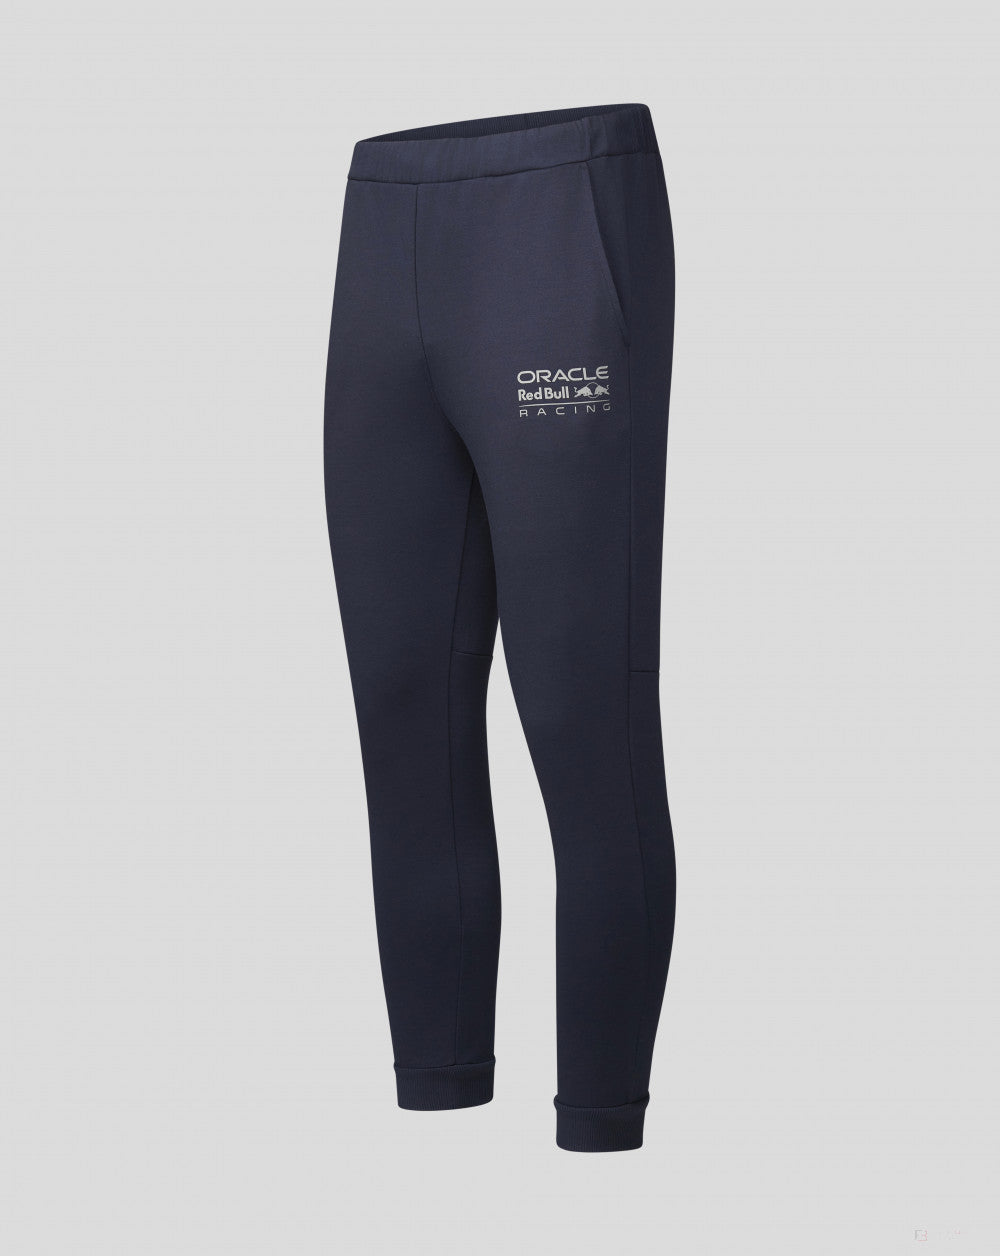 Red Bull Lifestyle Pant